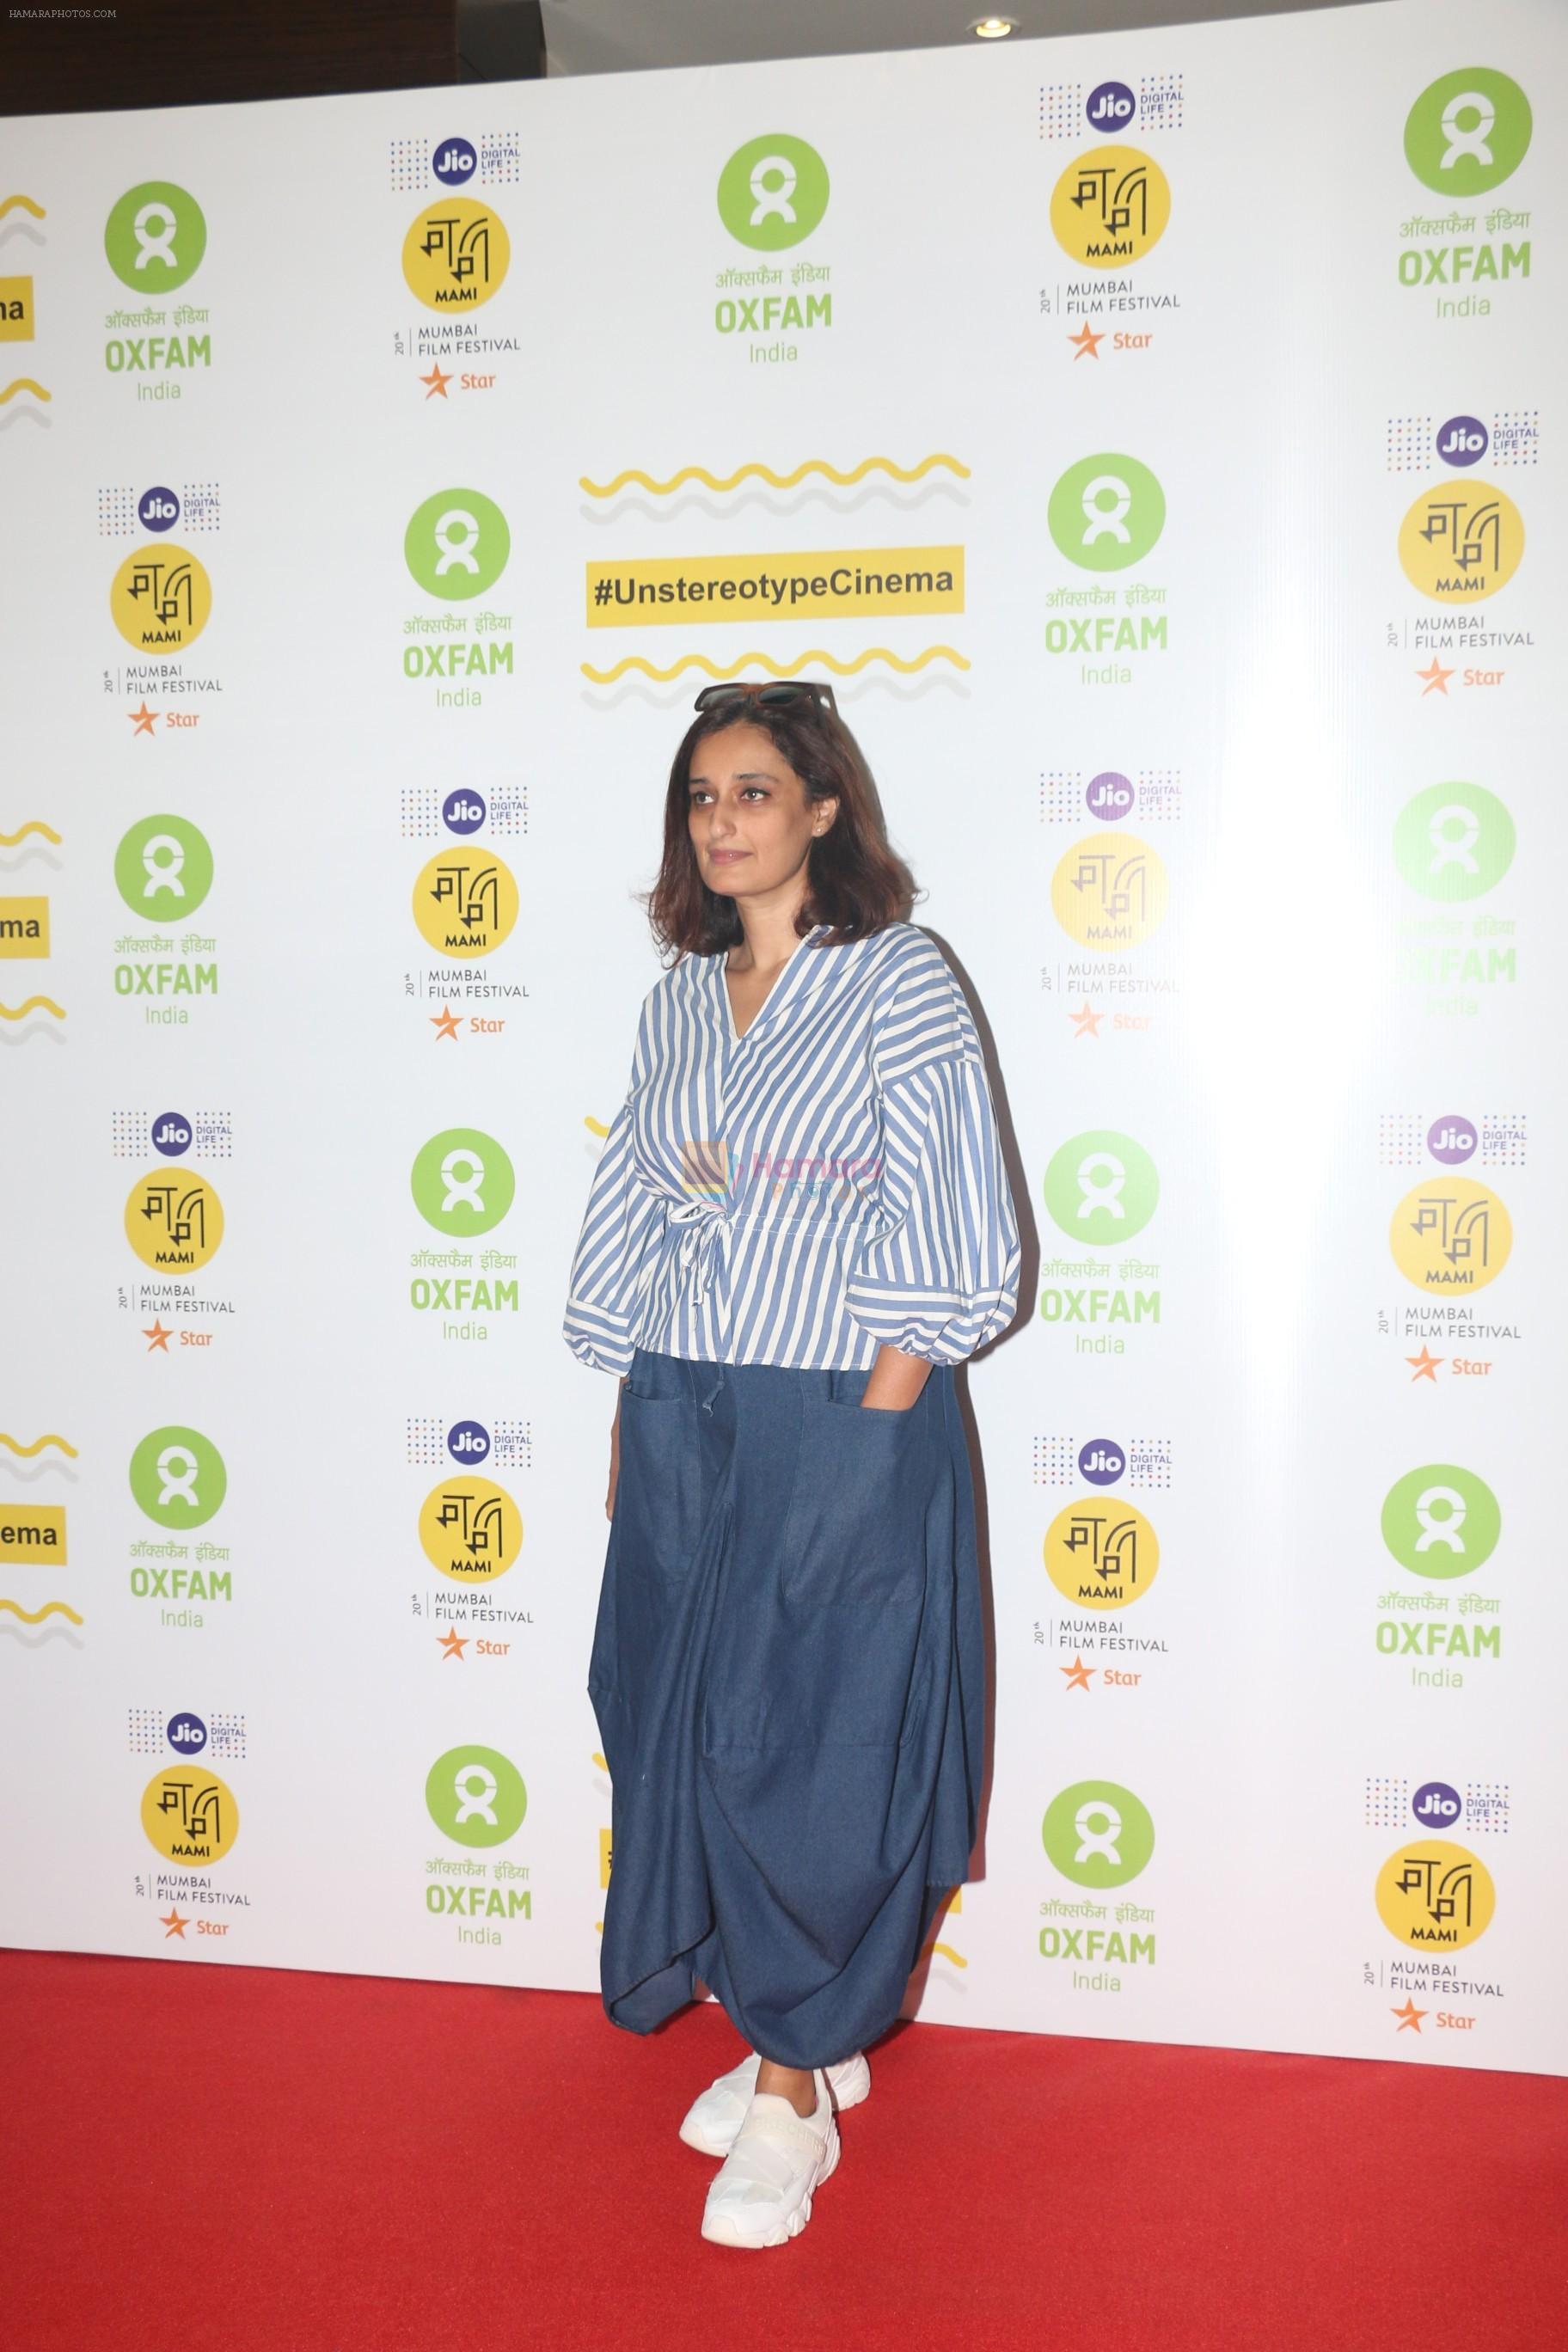 at the Red Carpet For Oxfam Mami Women In Film Brunch on 28th Oct 2018